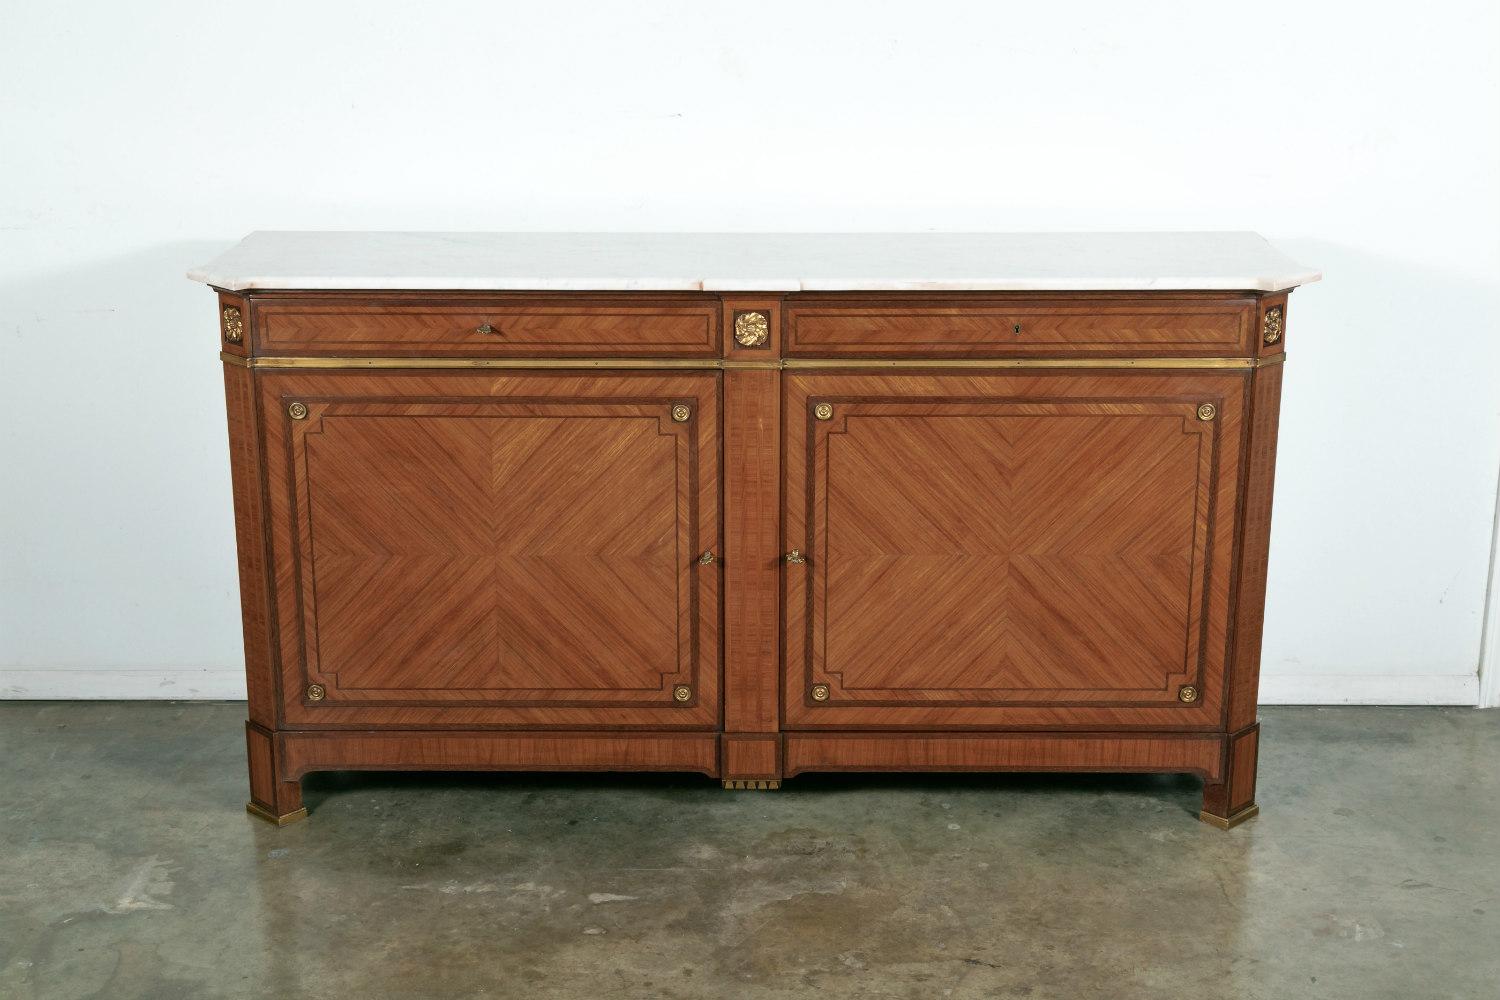 A rare and extremely elegant French Louis XVI style inlaid parquetry and marquetry buffet by Maison Gouffé, Paris, having a shaped Carrara marble top with projecting canted corners and finely chased bronze ormolu mounts and brass trim. This stunning